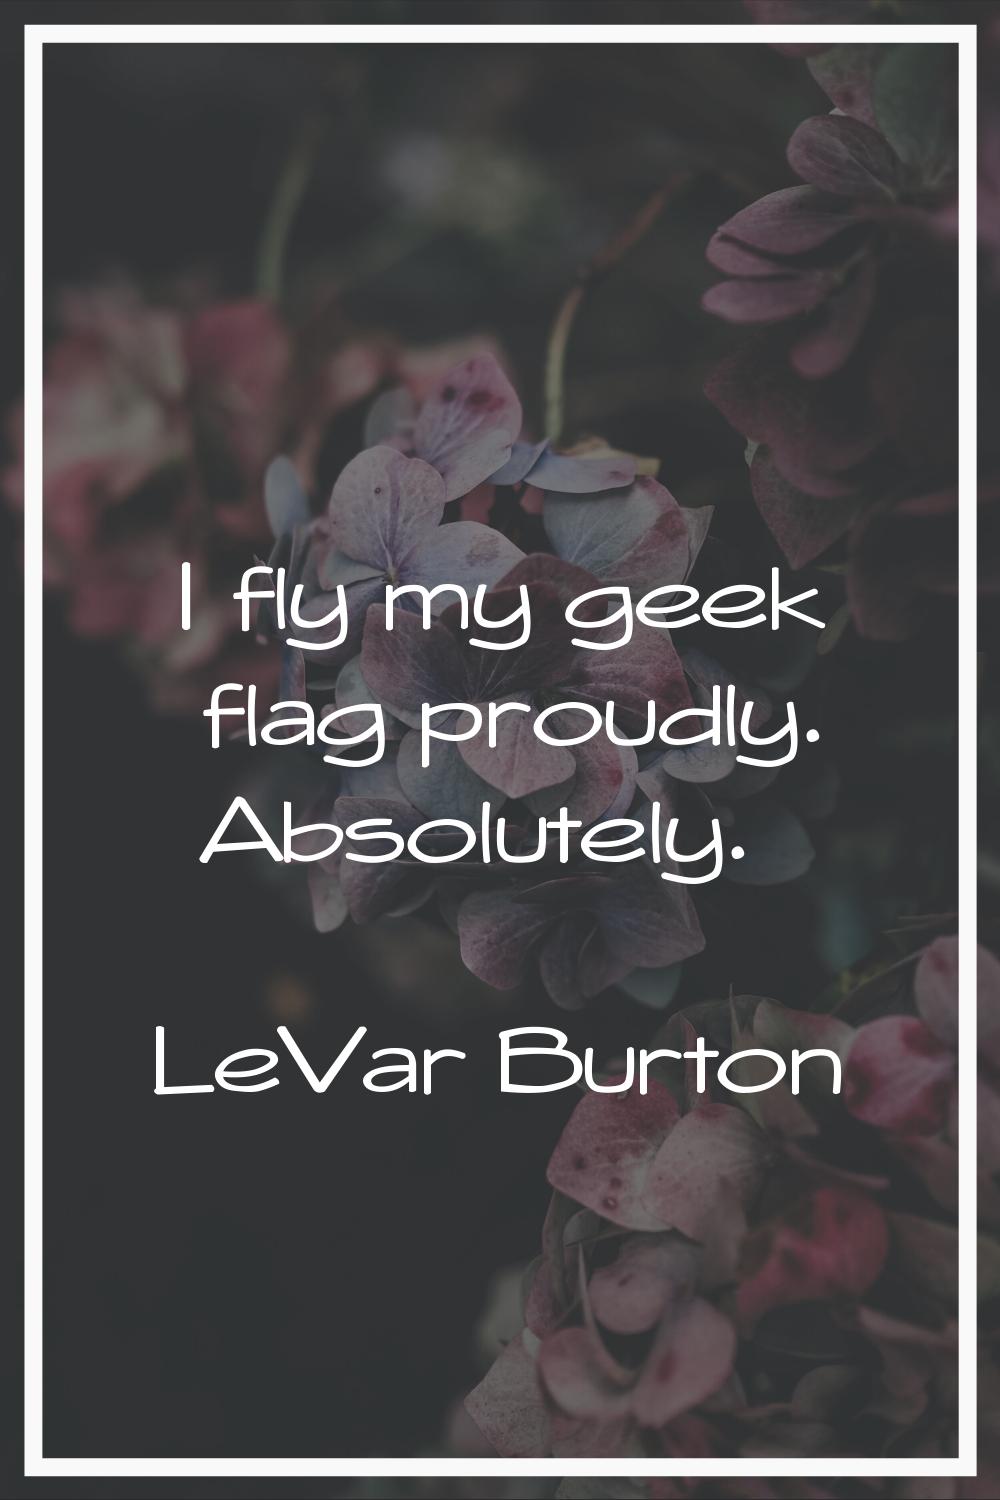 I fly my geek flag proudly. Absolutely.